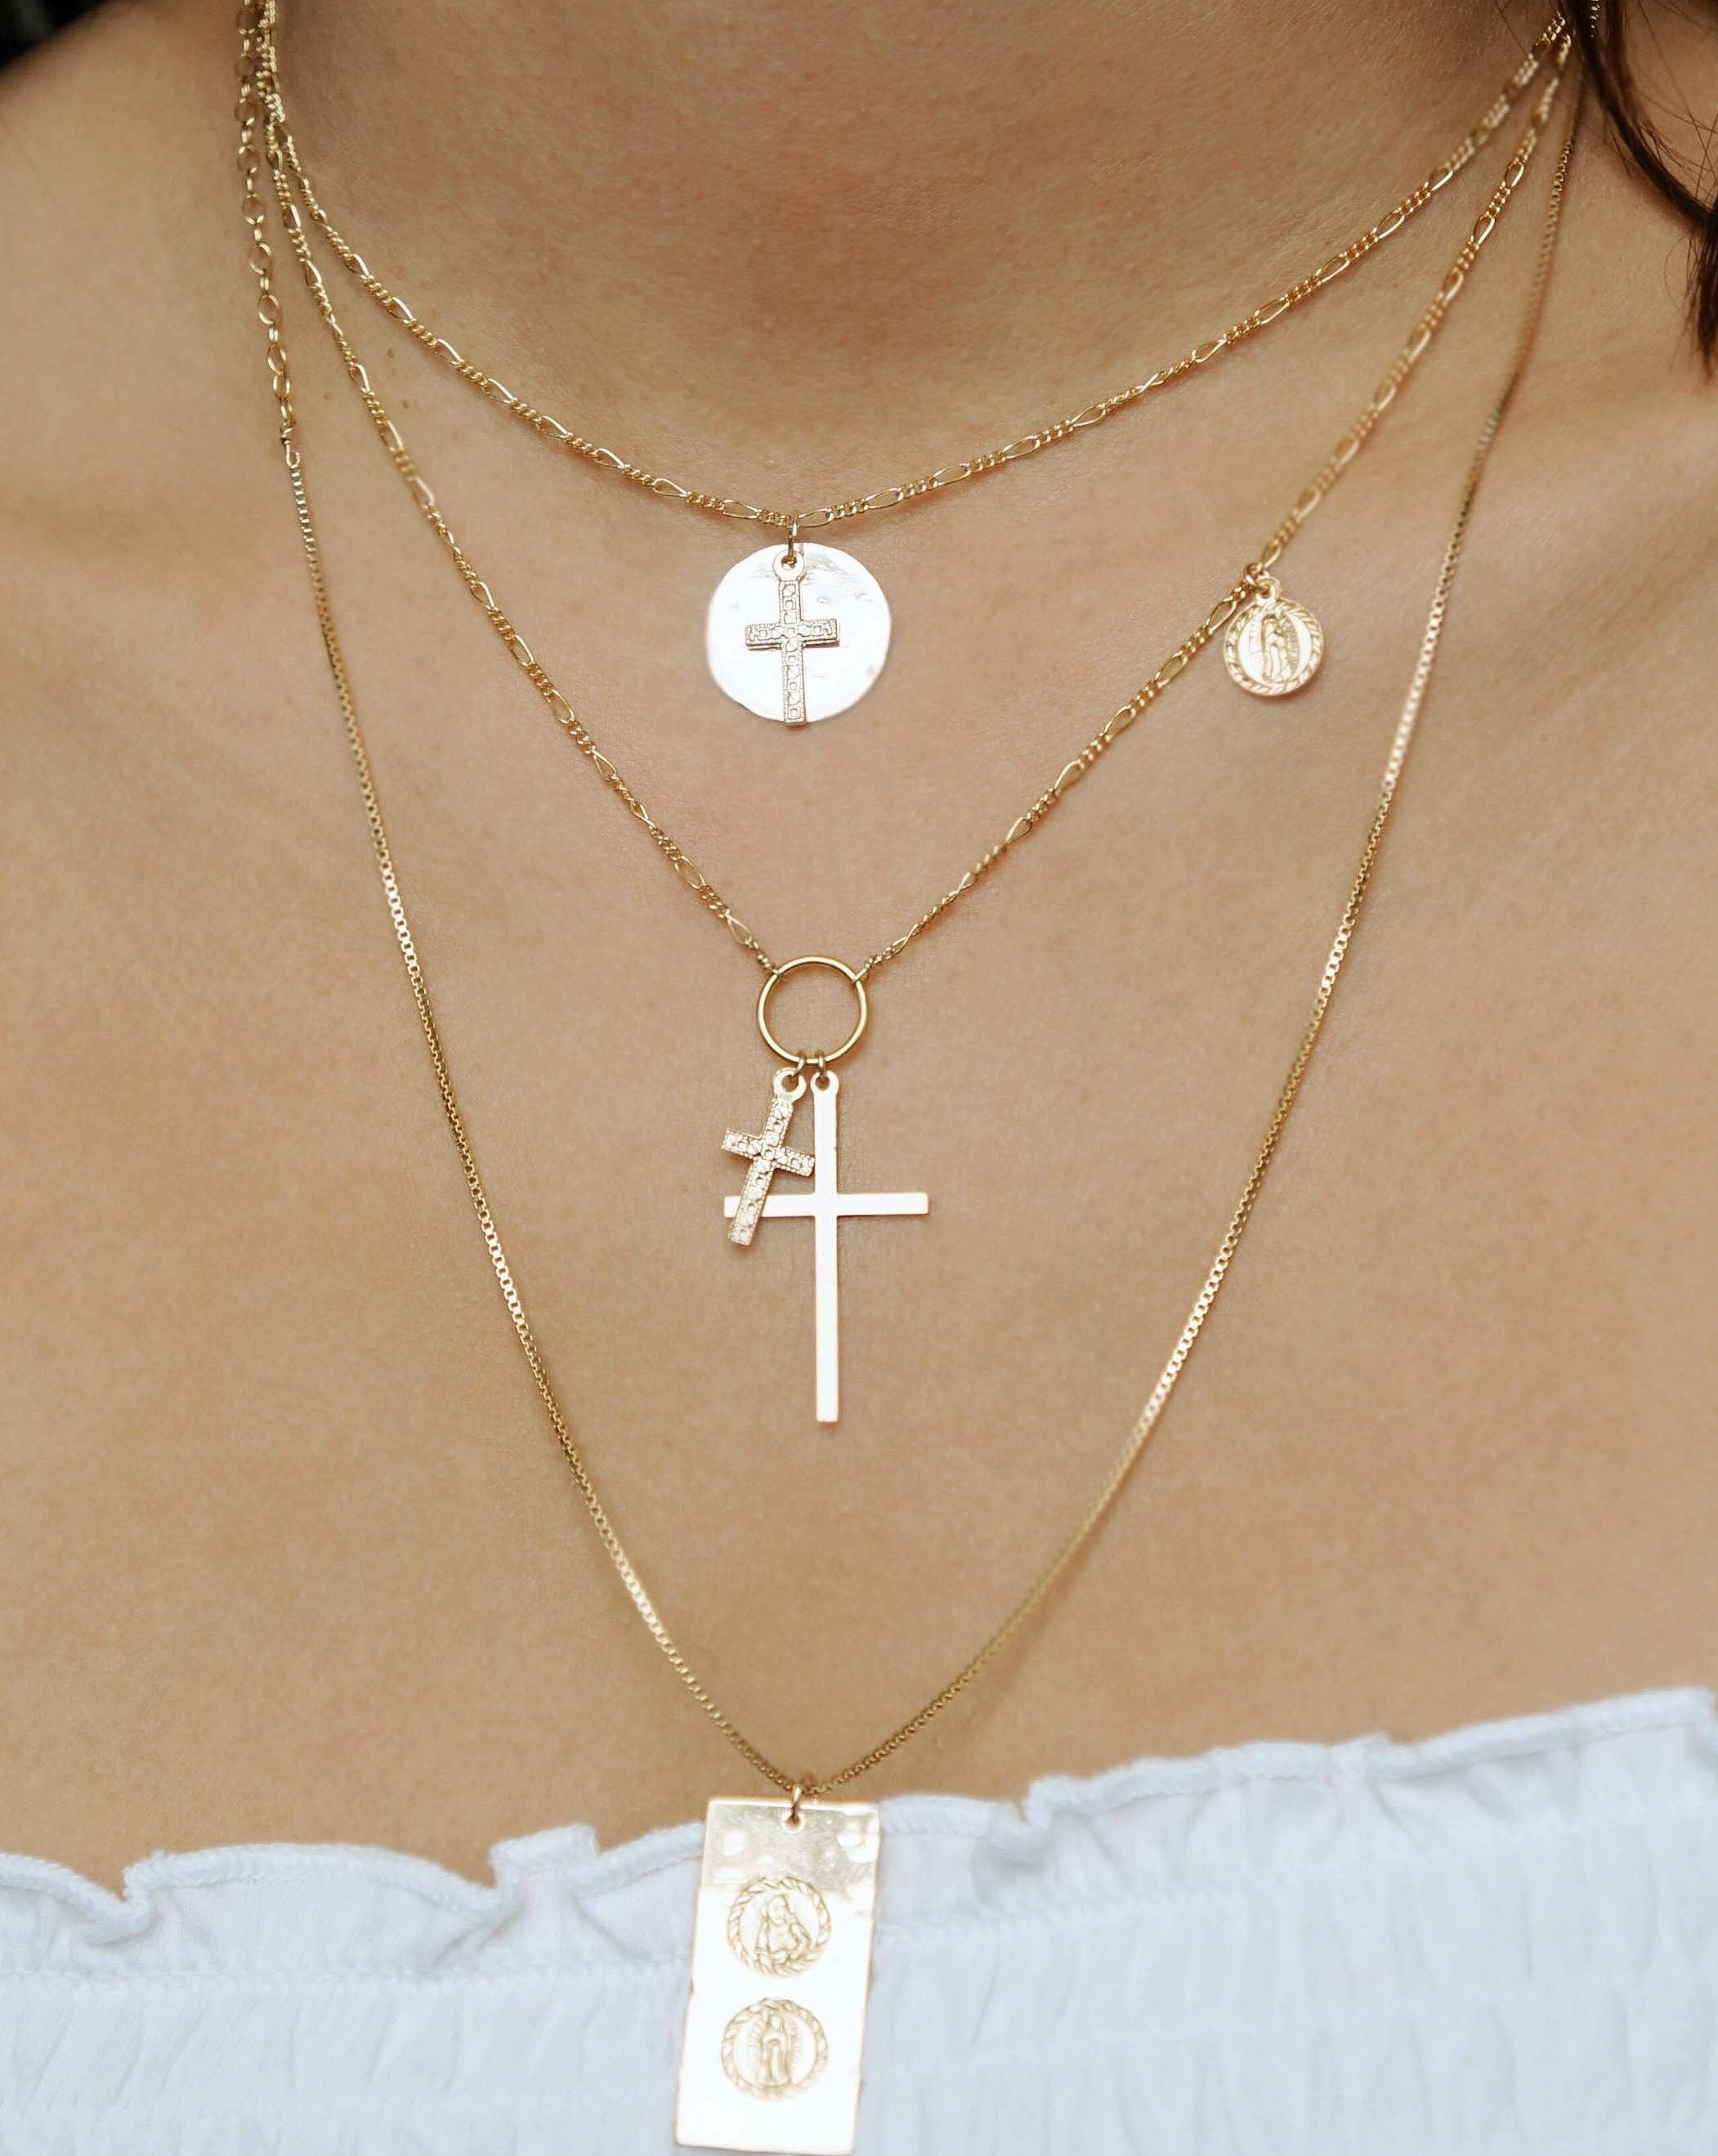 Orbis Necklace by KOZAKH. A 16 to 18 inch adjustable length Figaro chain necklace, crafted in 14K Gold Filled, featuring a 16mm Hammered on the sides coin and a 5x10mm Filigree cross.